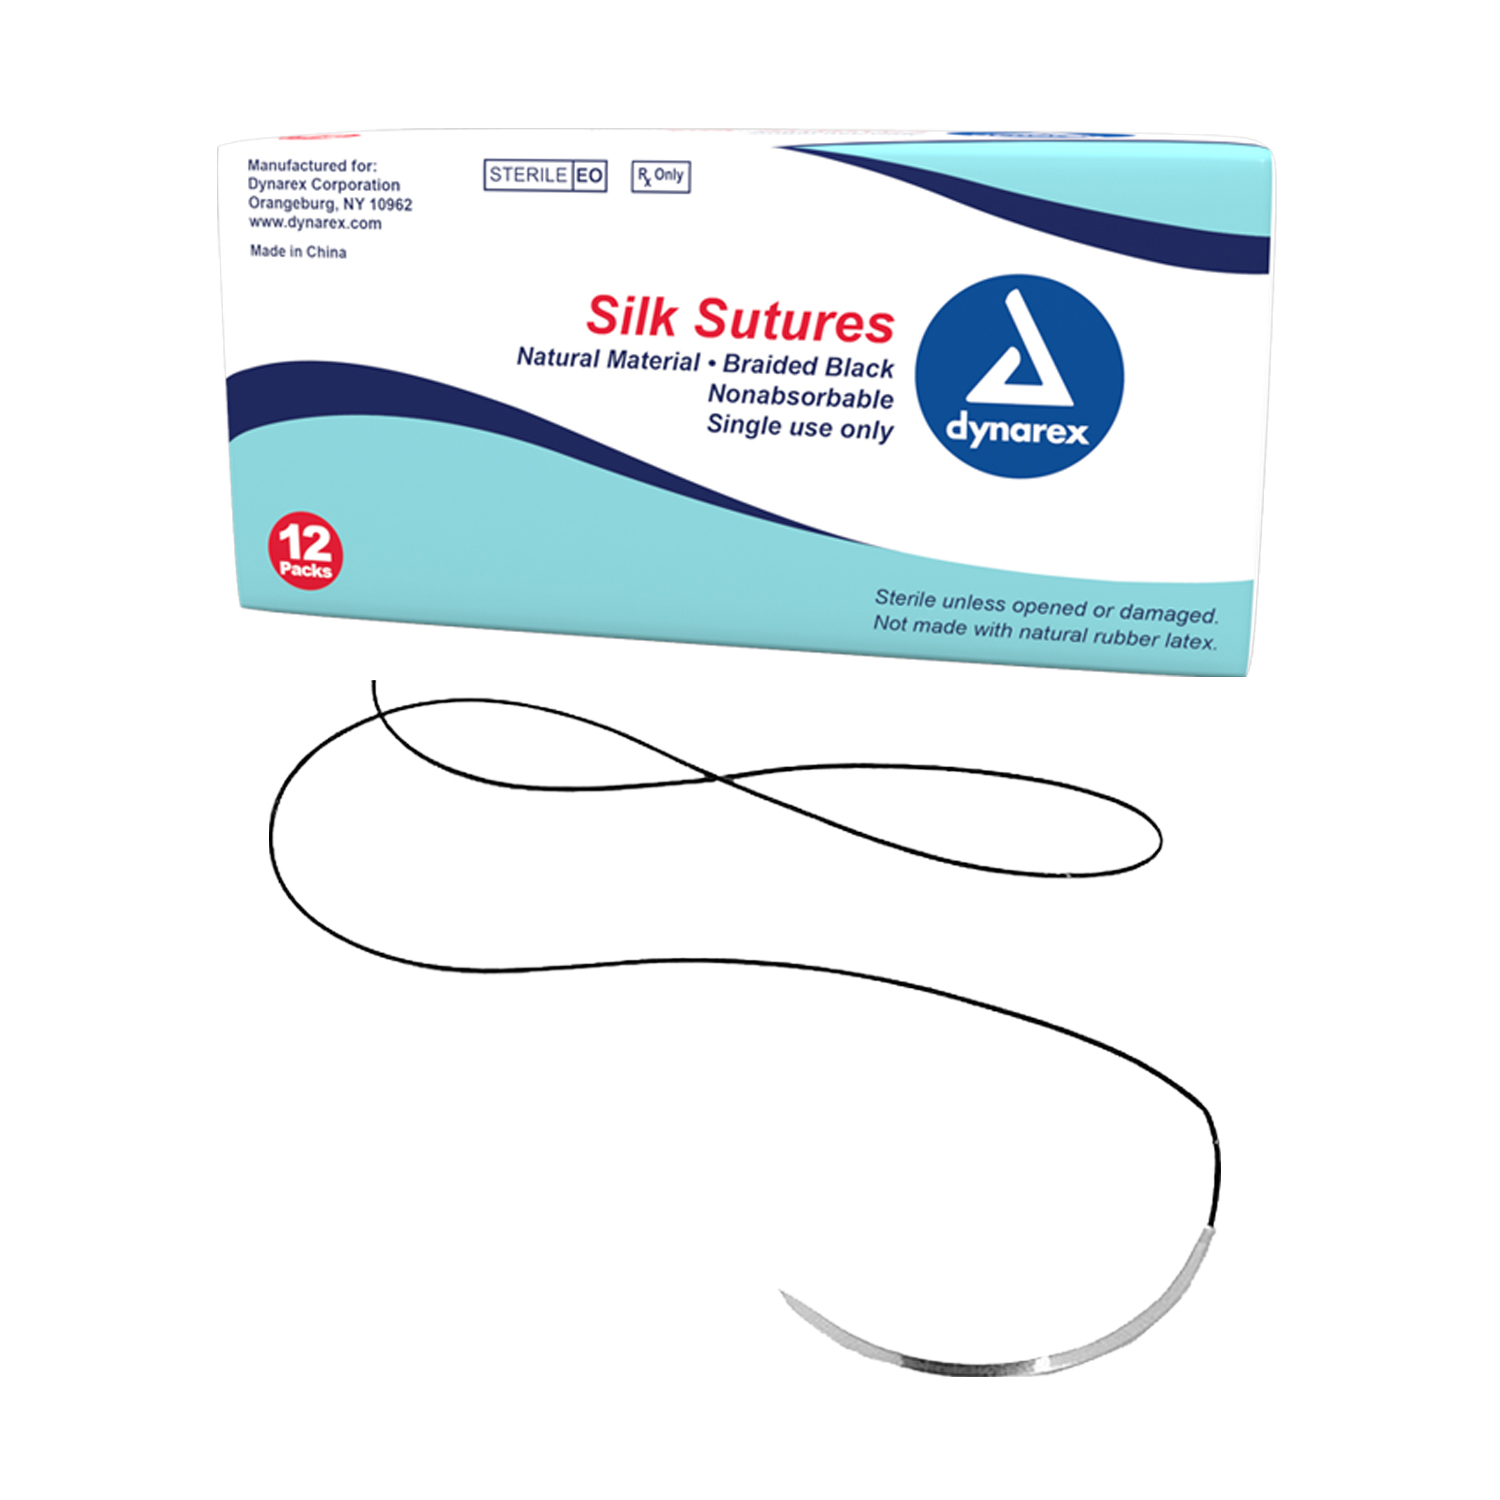 Braided Black Silk Sutures-Non Absorbable Black, 3-0, C6 Needle, 18